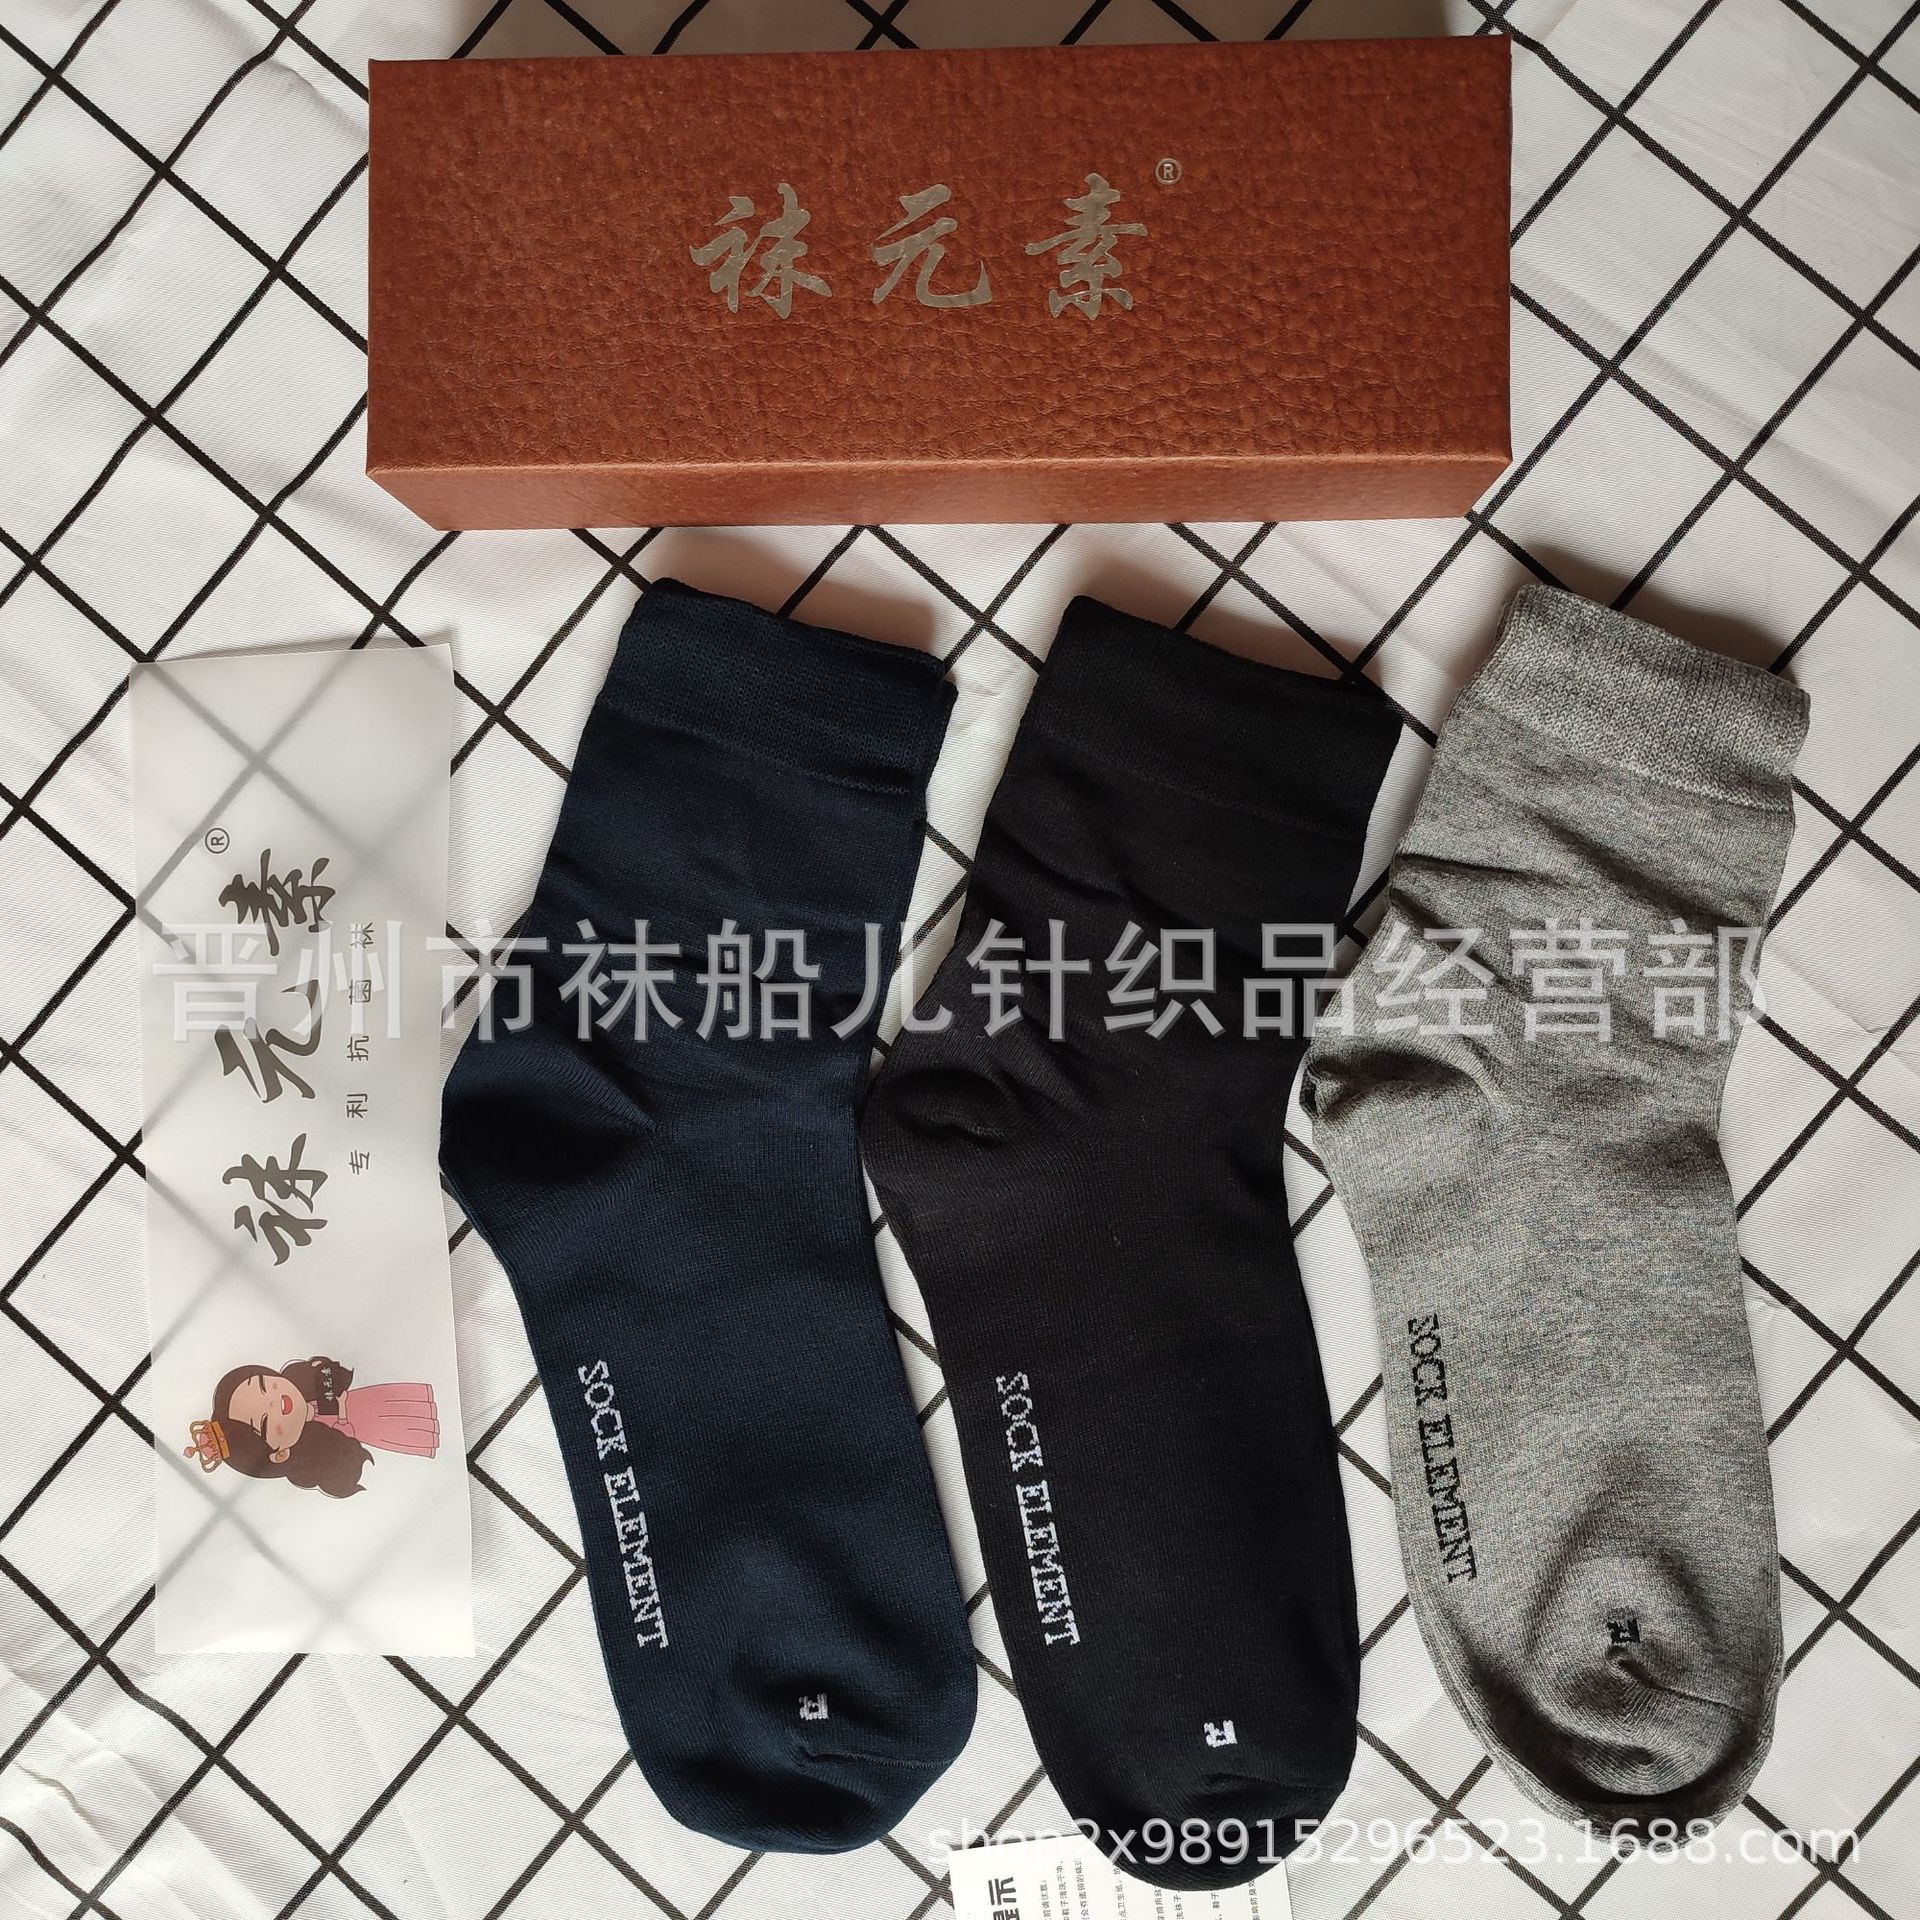 Socks Element Wechat Genuine Men and Women Black White Gray Solid Color Gift Box Socks Various Designs Item No. Support One